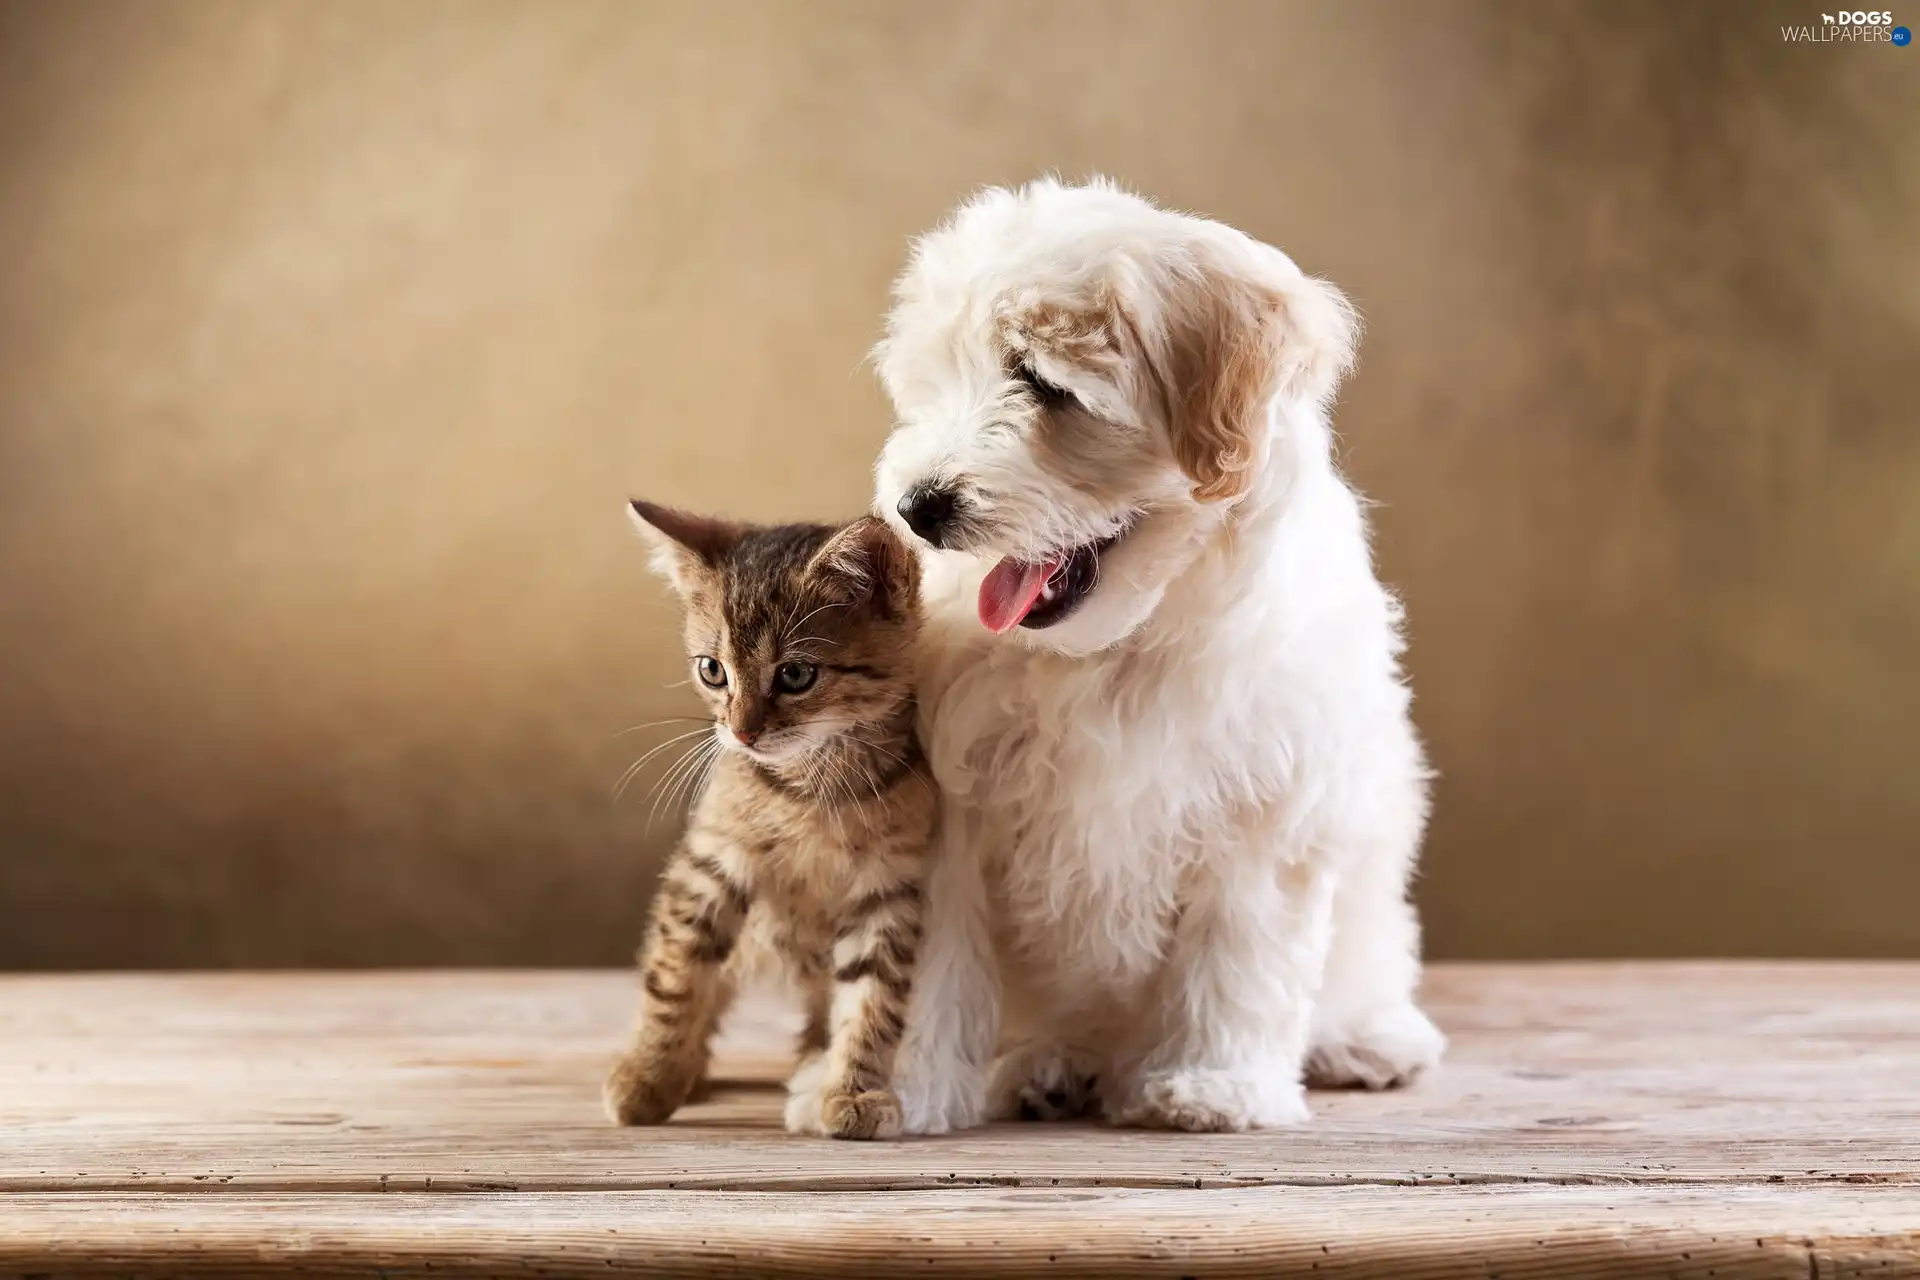 Puppy, dog, small, cat Dogs wallpapers 2200x1467